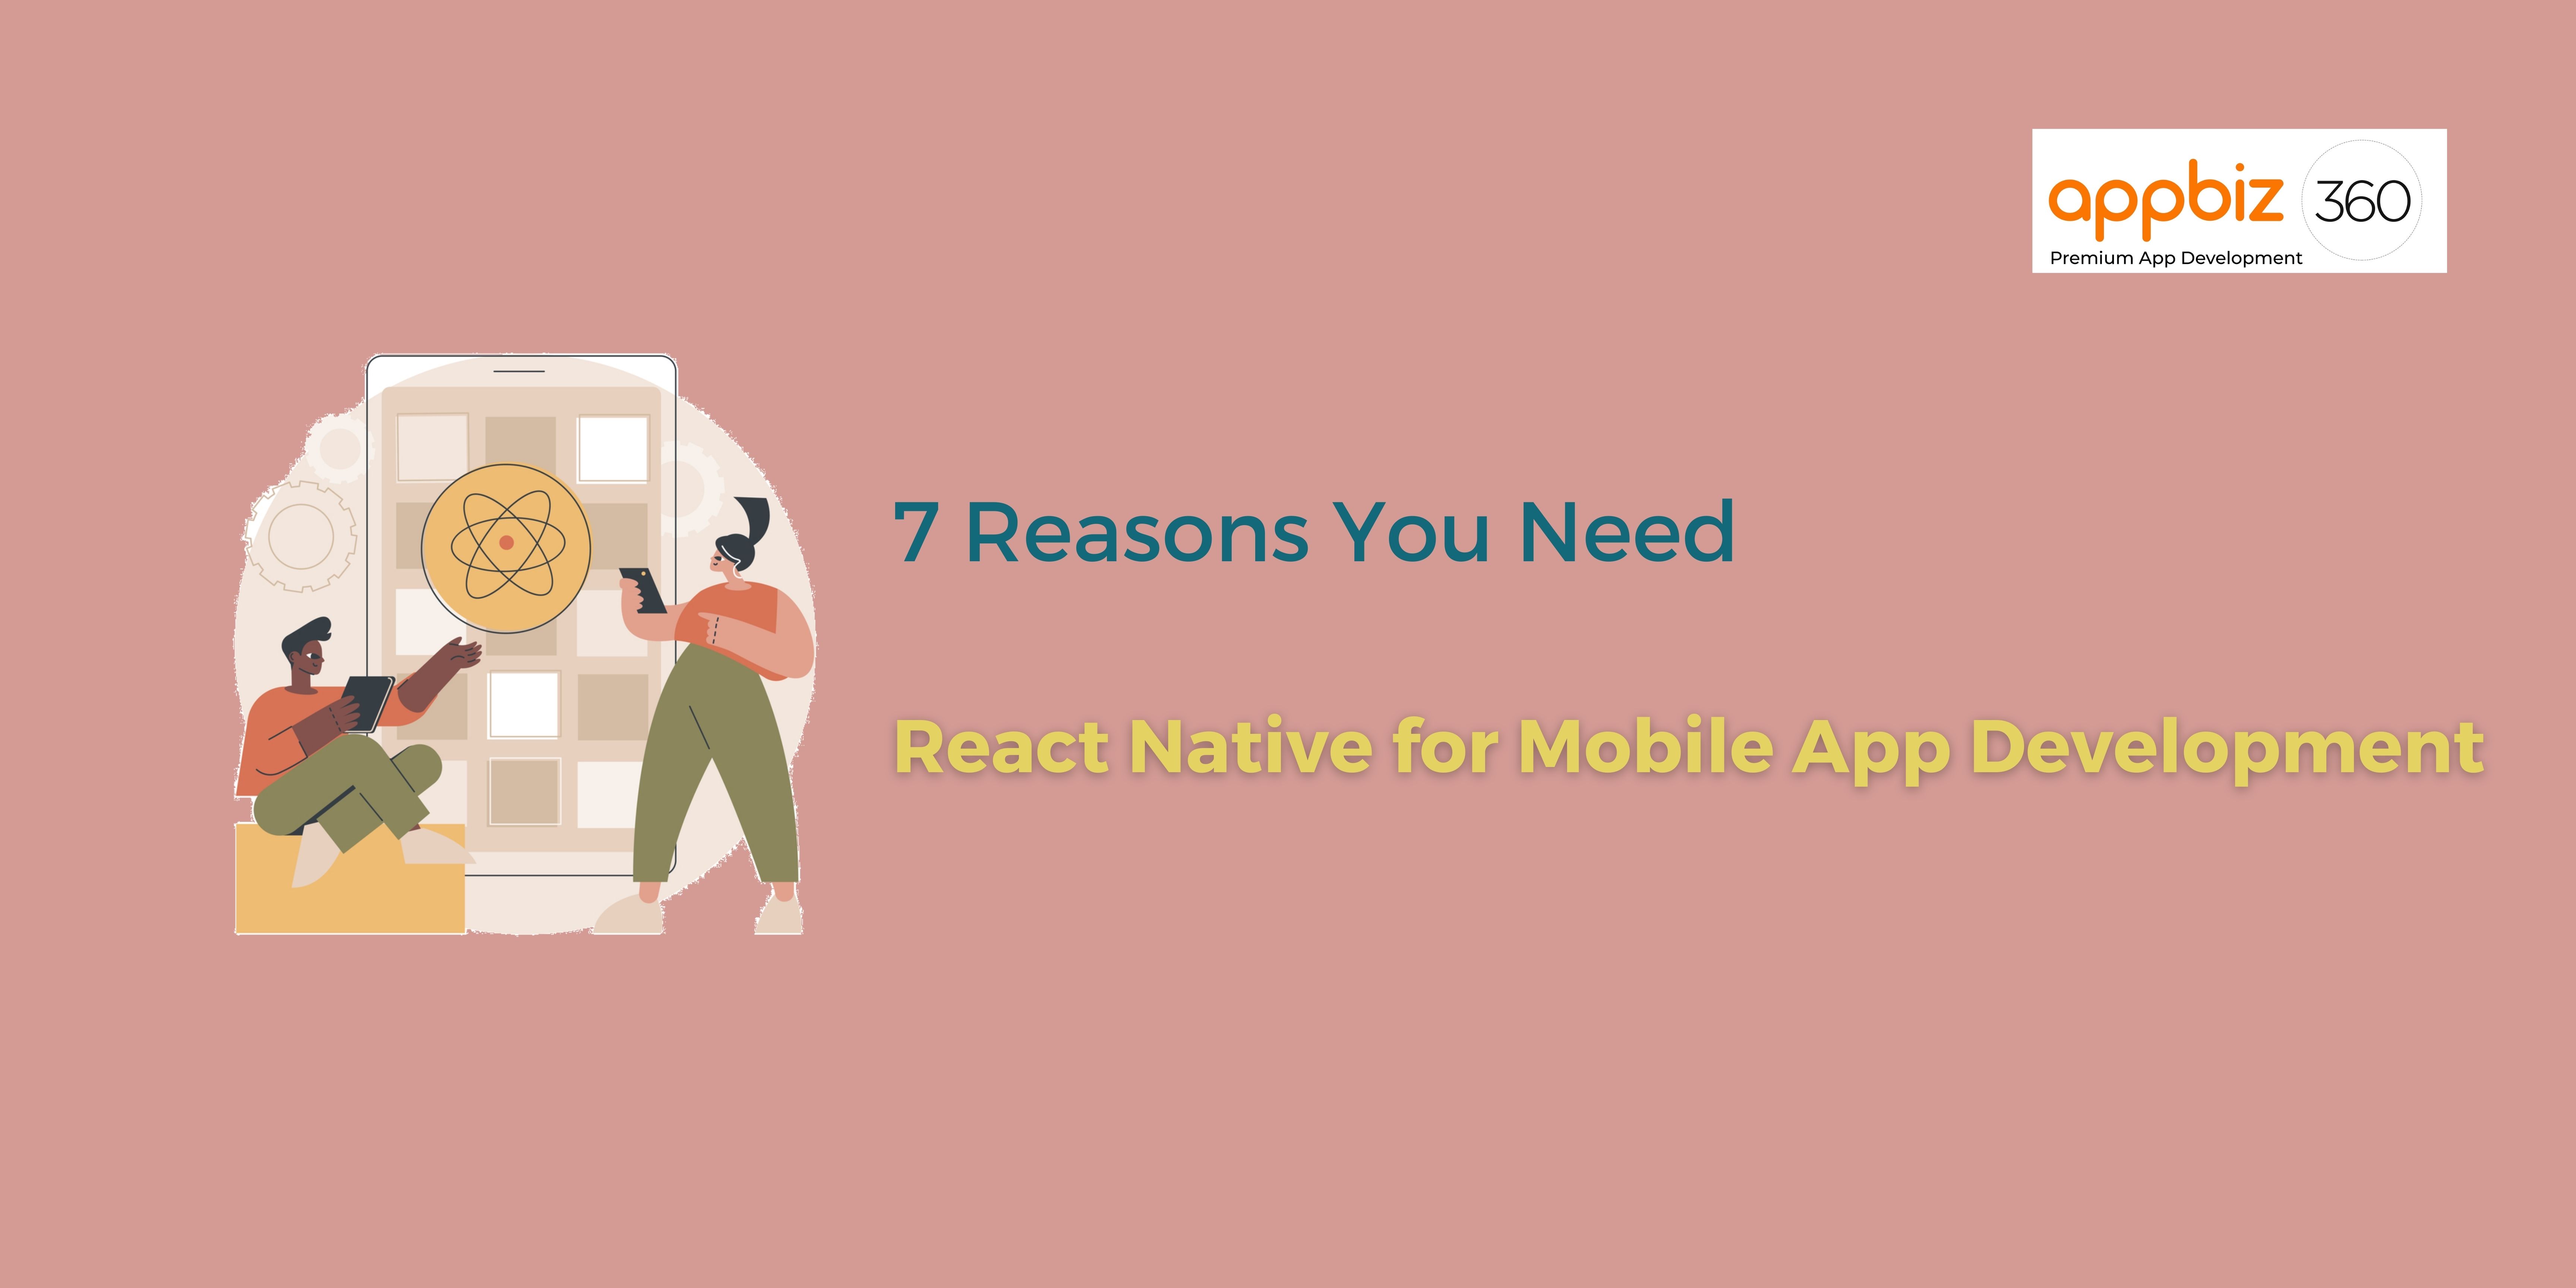 7 Reasons You Need React Native for Mobile App Development